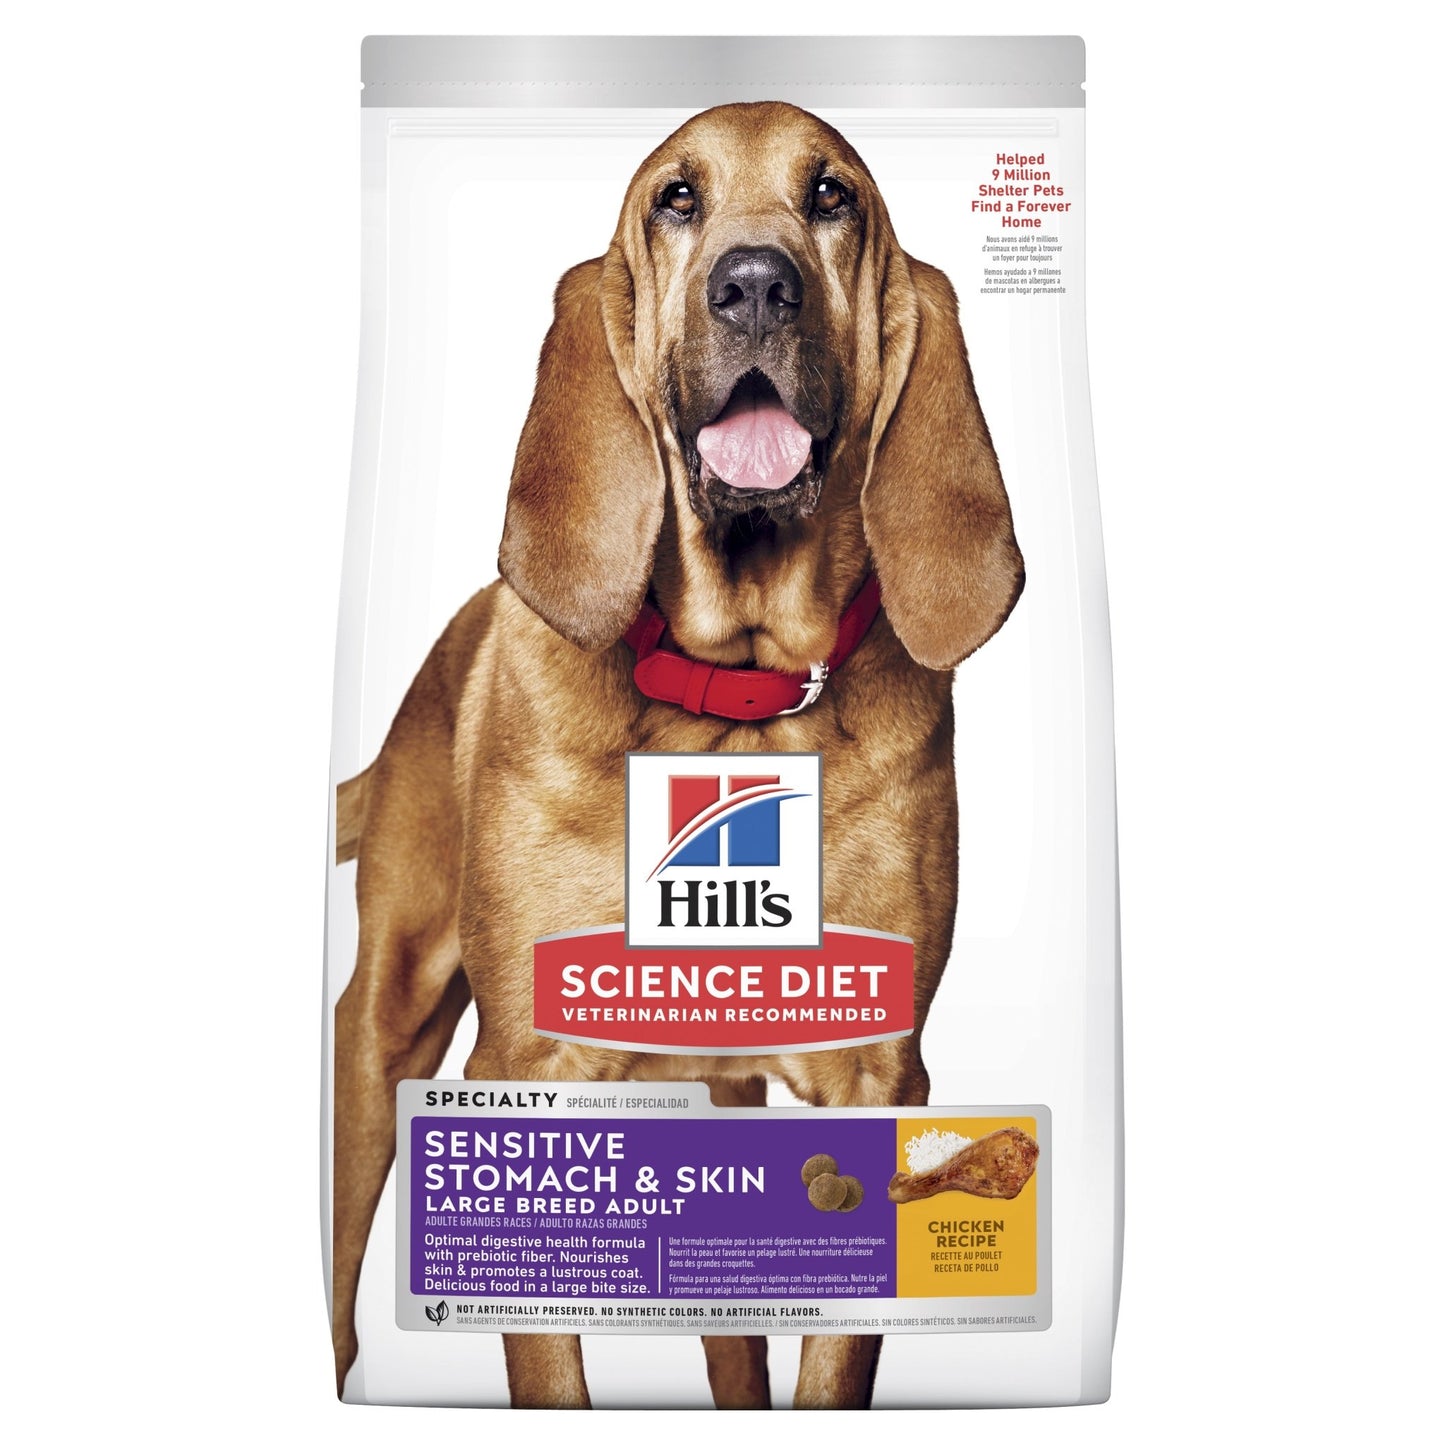 Hill's Science Diet Sensitive Stomach & Skin Adult Large Breed Dry Dog Food, 13.6kg - Woonona Petfood & Produce